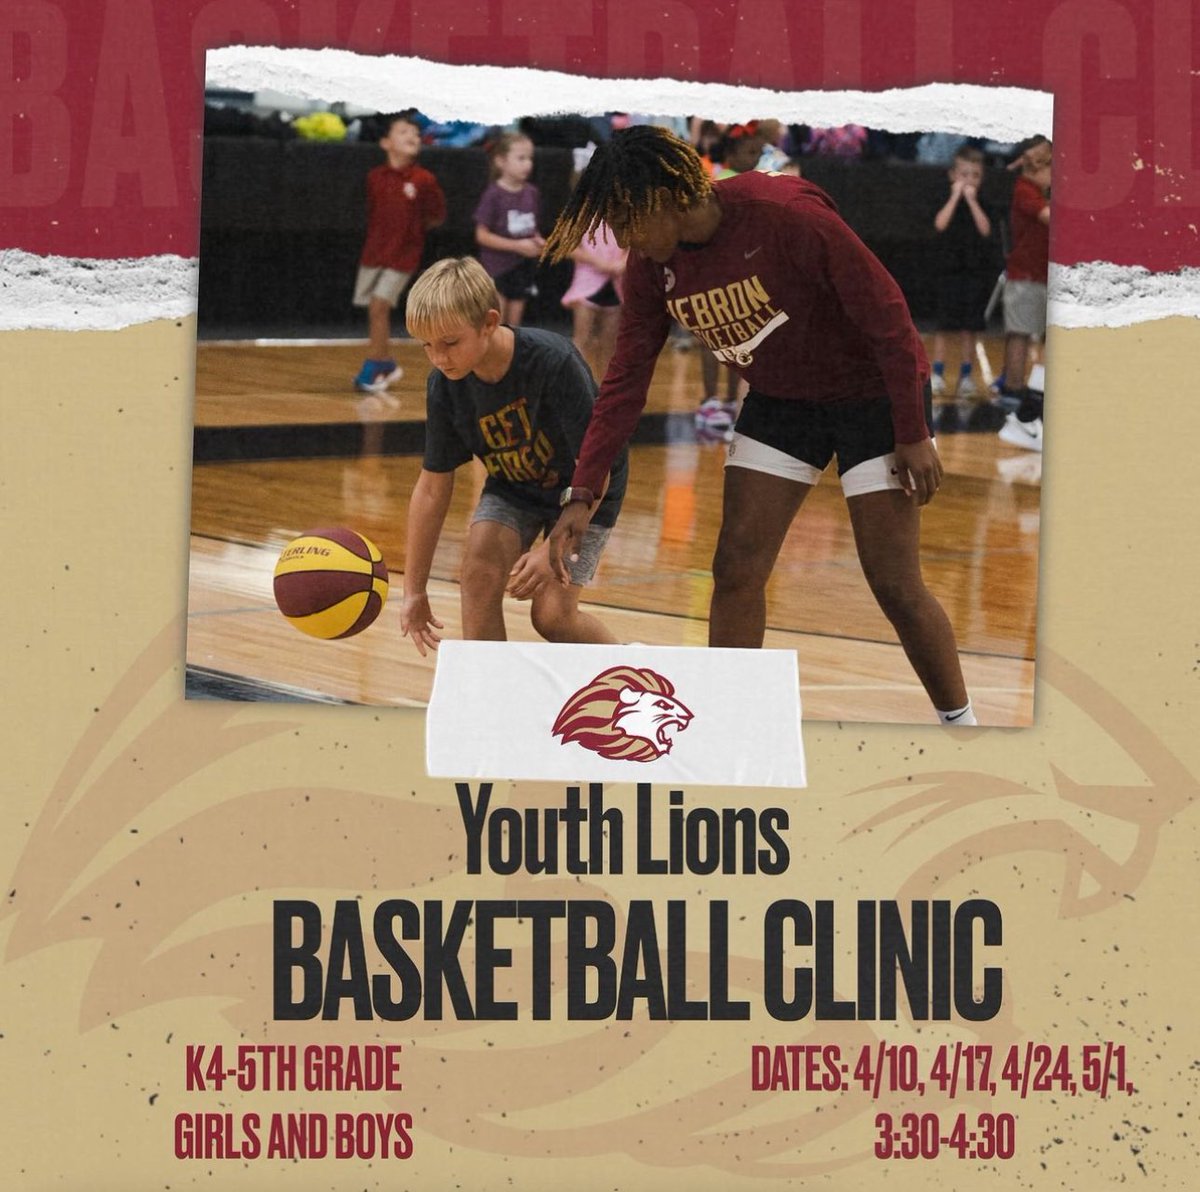 Sign up’s are open for our Basketball Clinic starting this Wednesday. hebronathletics.org Click on “inside athletics”, then Youth Lions Community Sports. 🏀